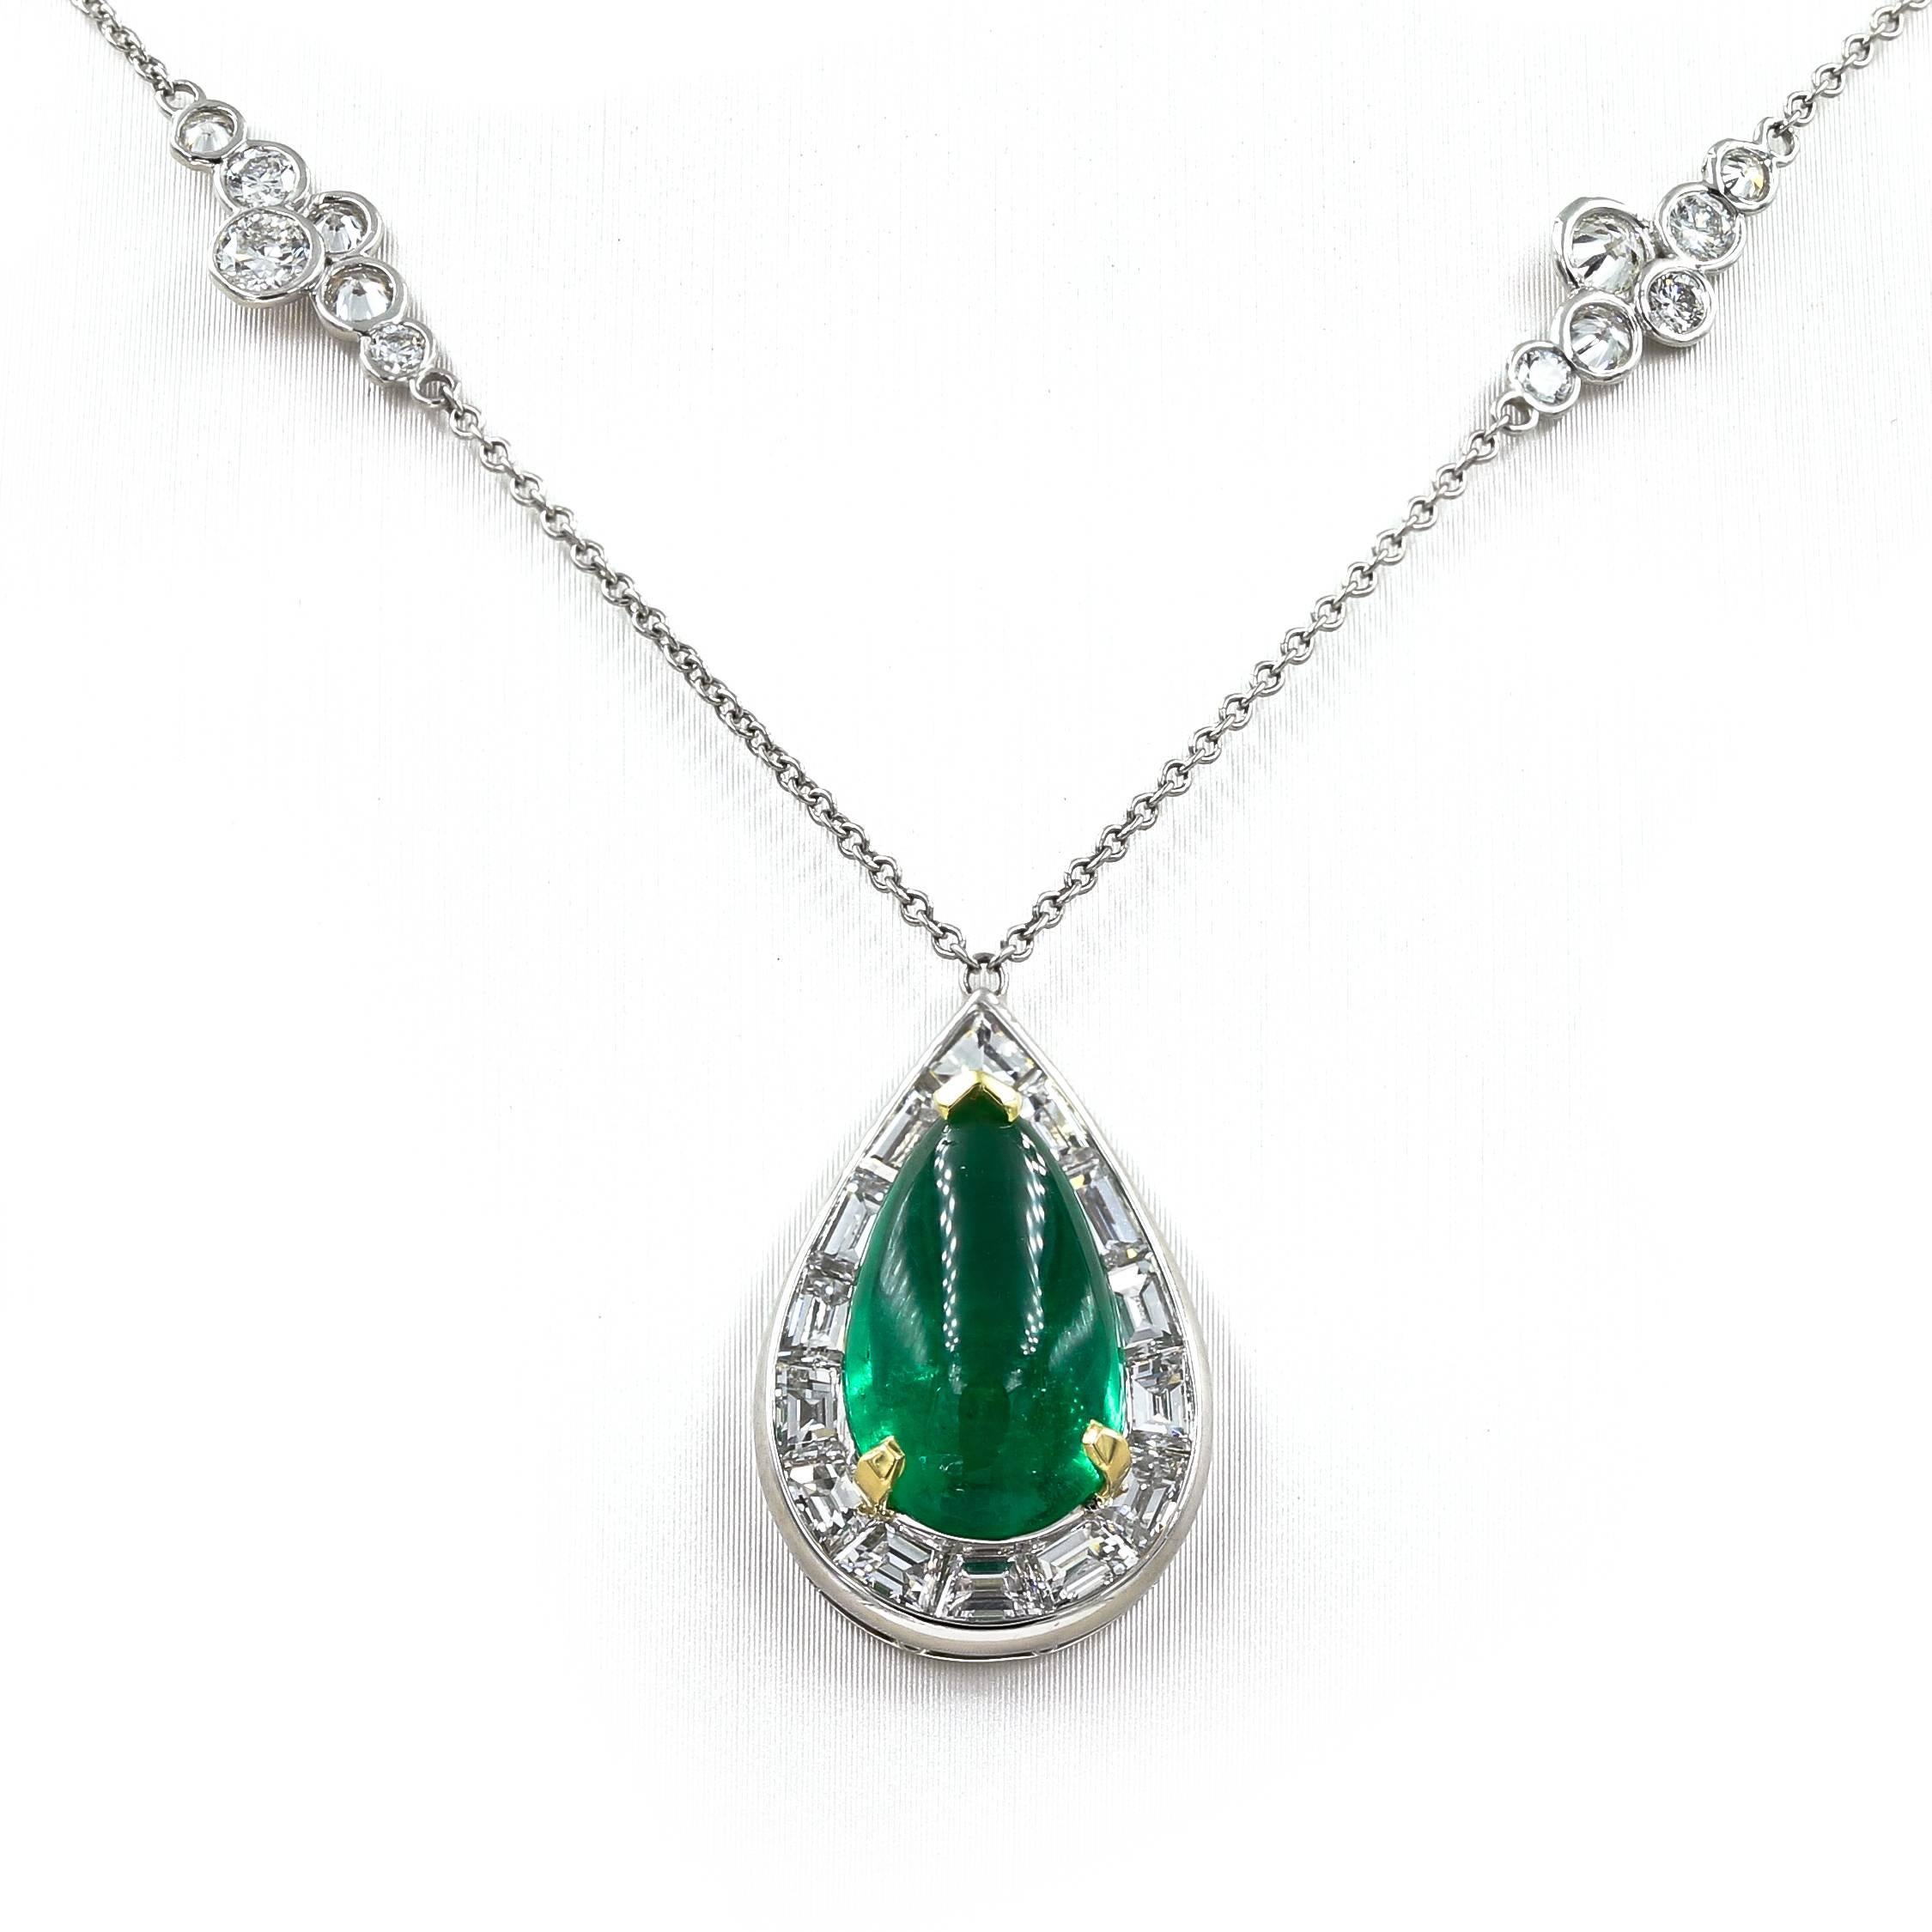 Contemporary Stunning 3.95 Carat Cabochon Emerald and Diamond Necklace